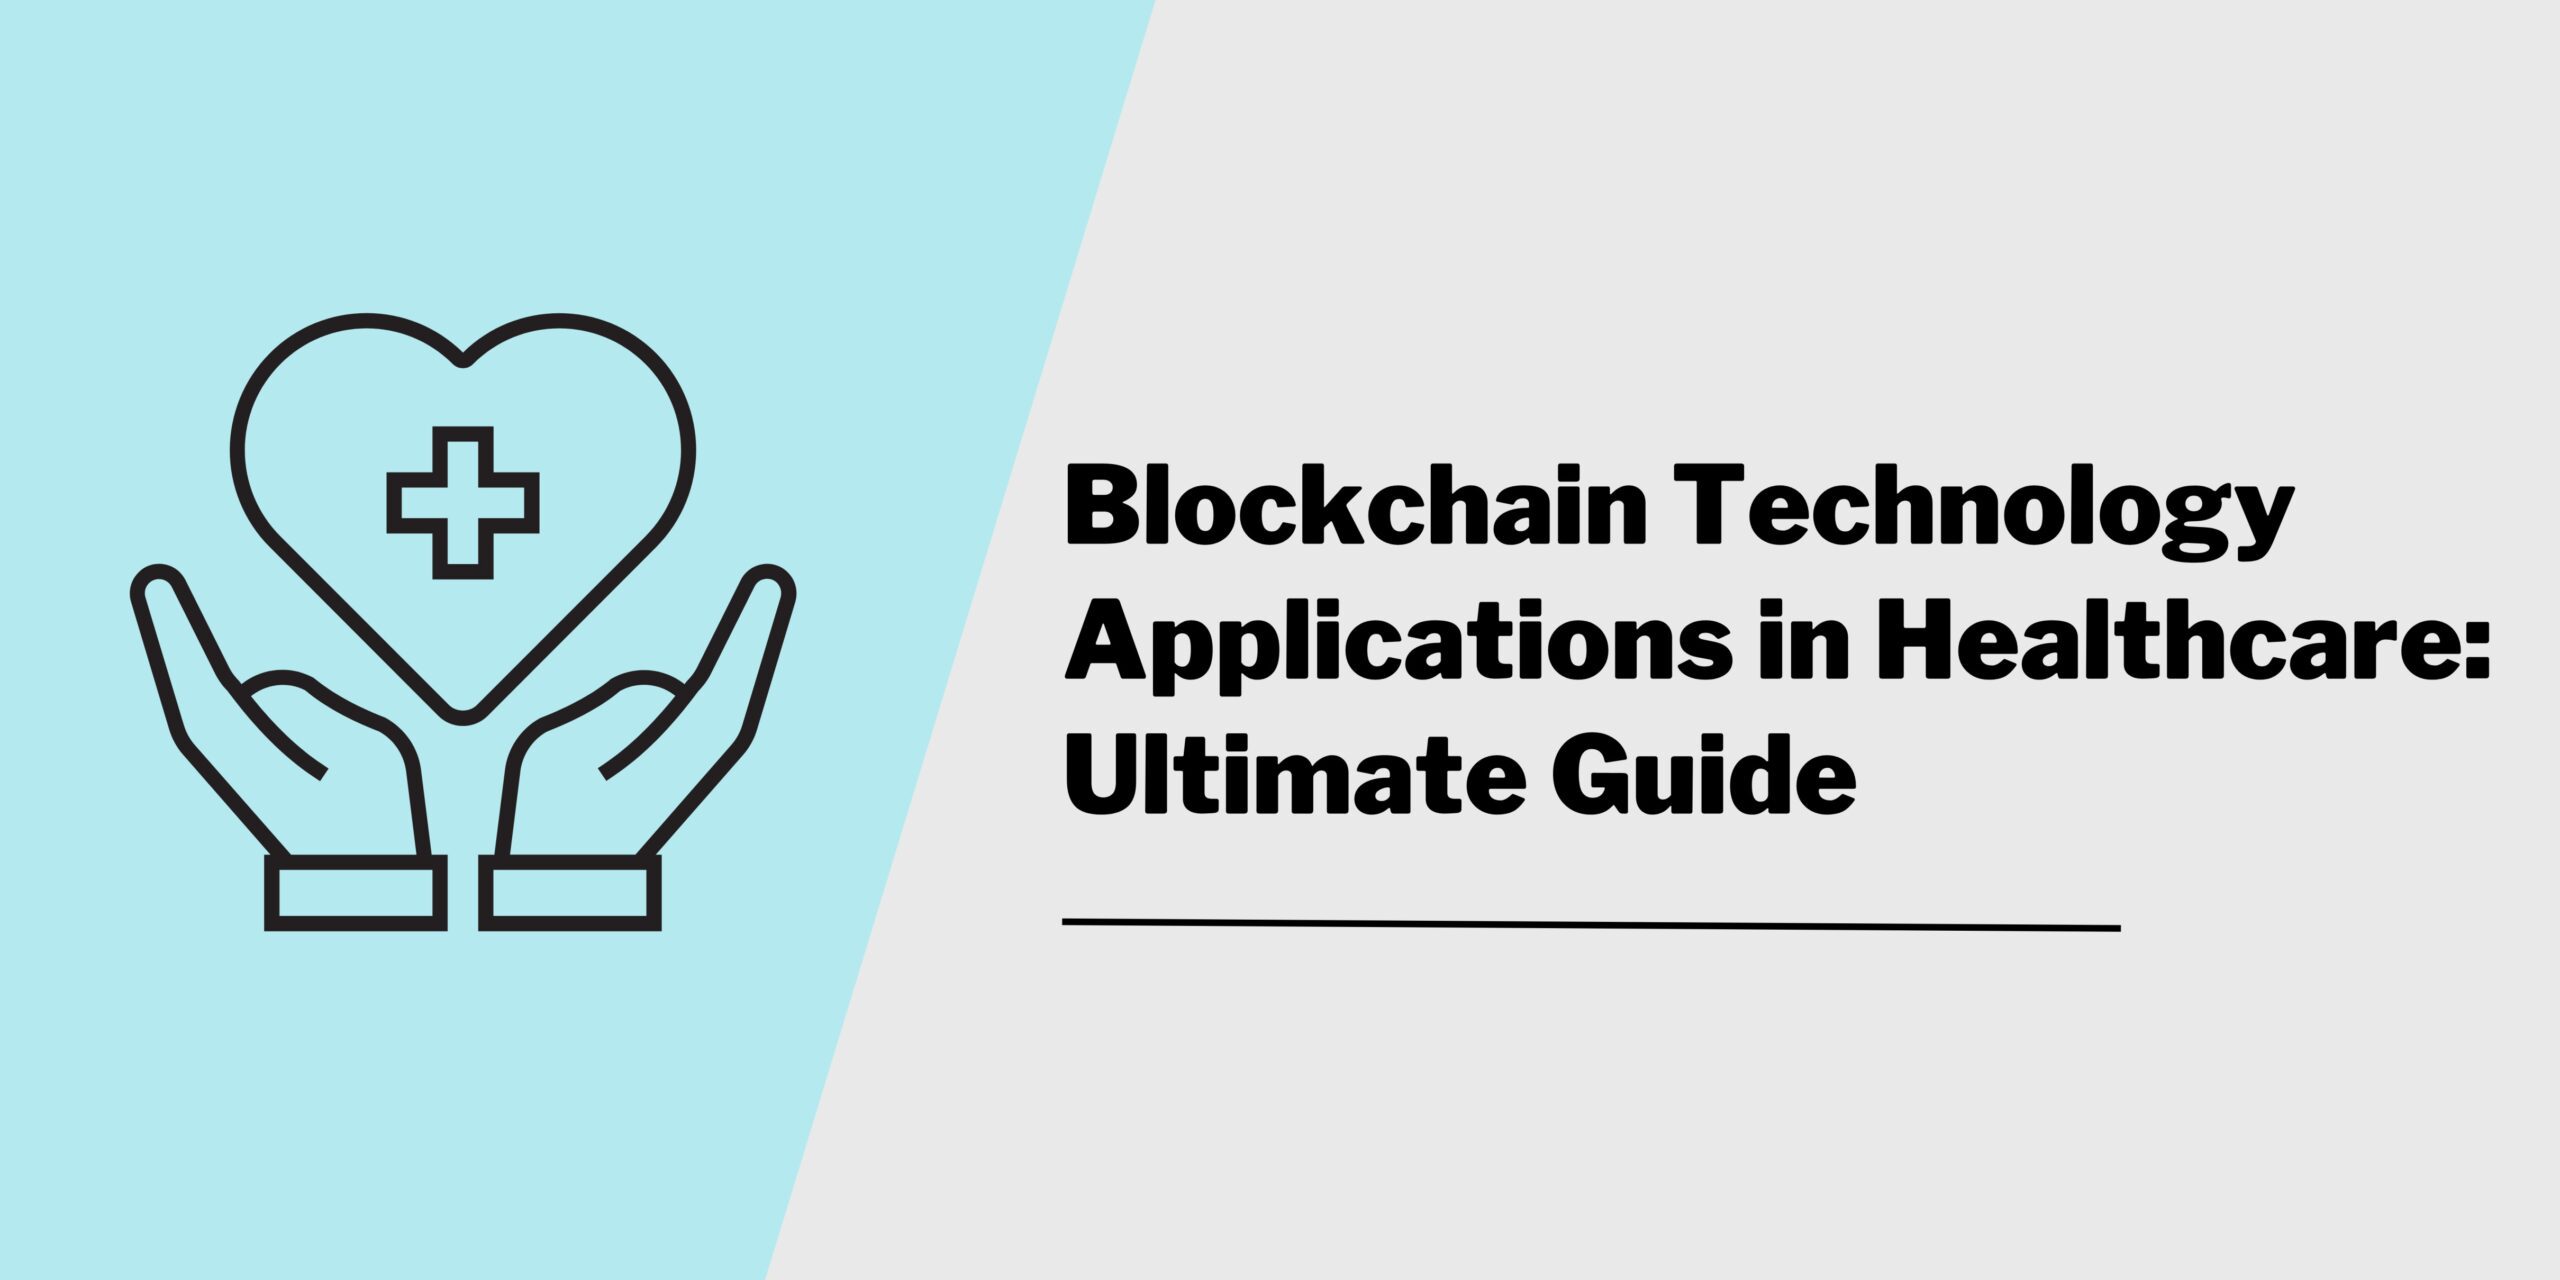 Blockchain Technology Applications in Healthcare: A Guide